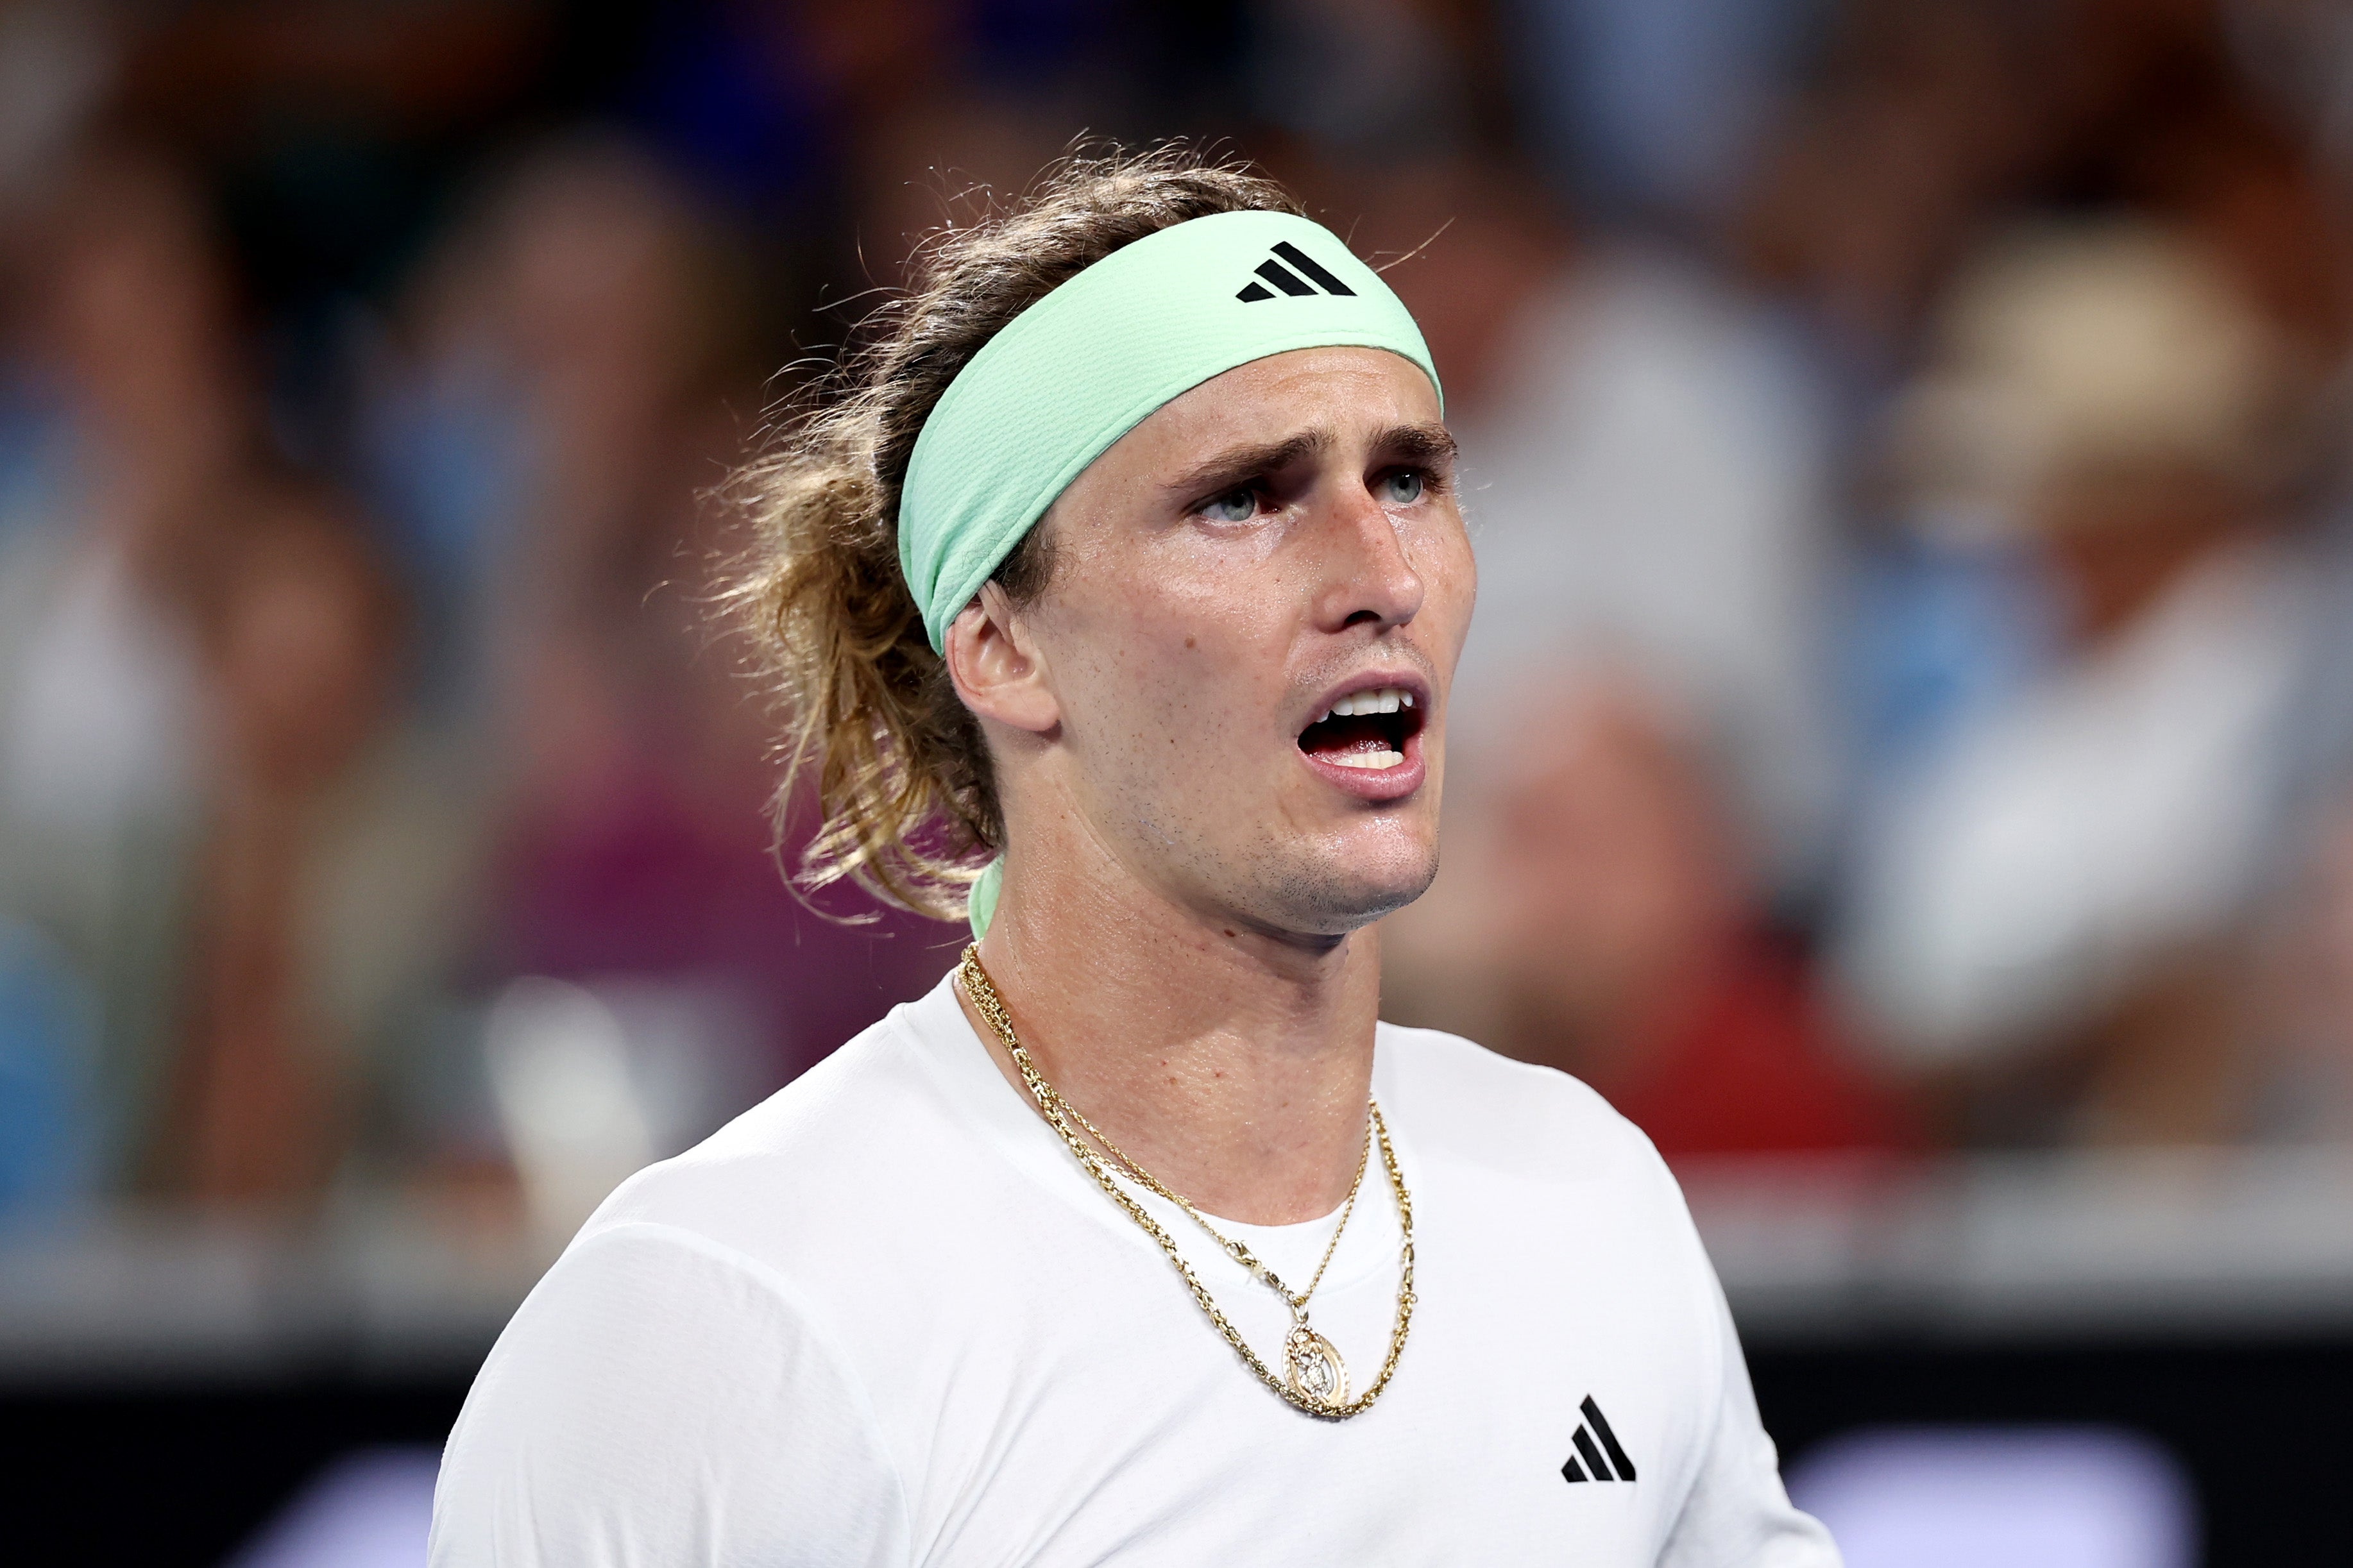 Zverev is set for a public trial in May